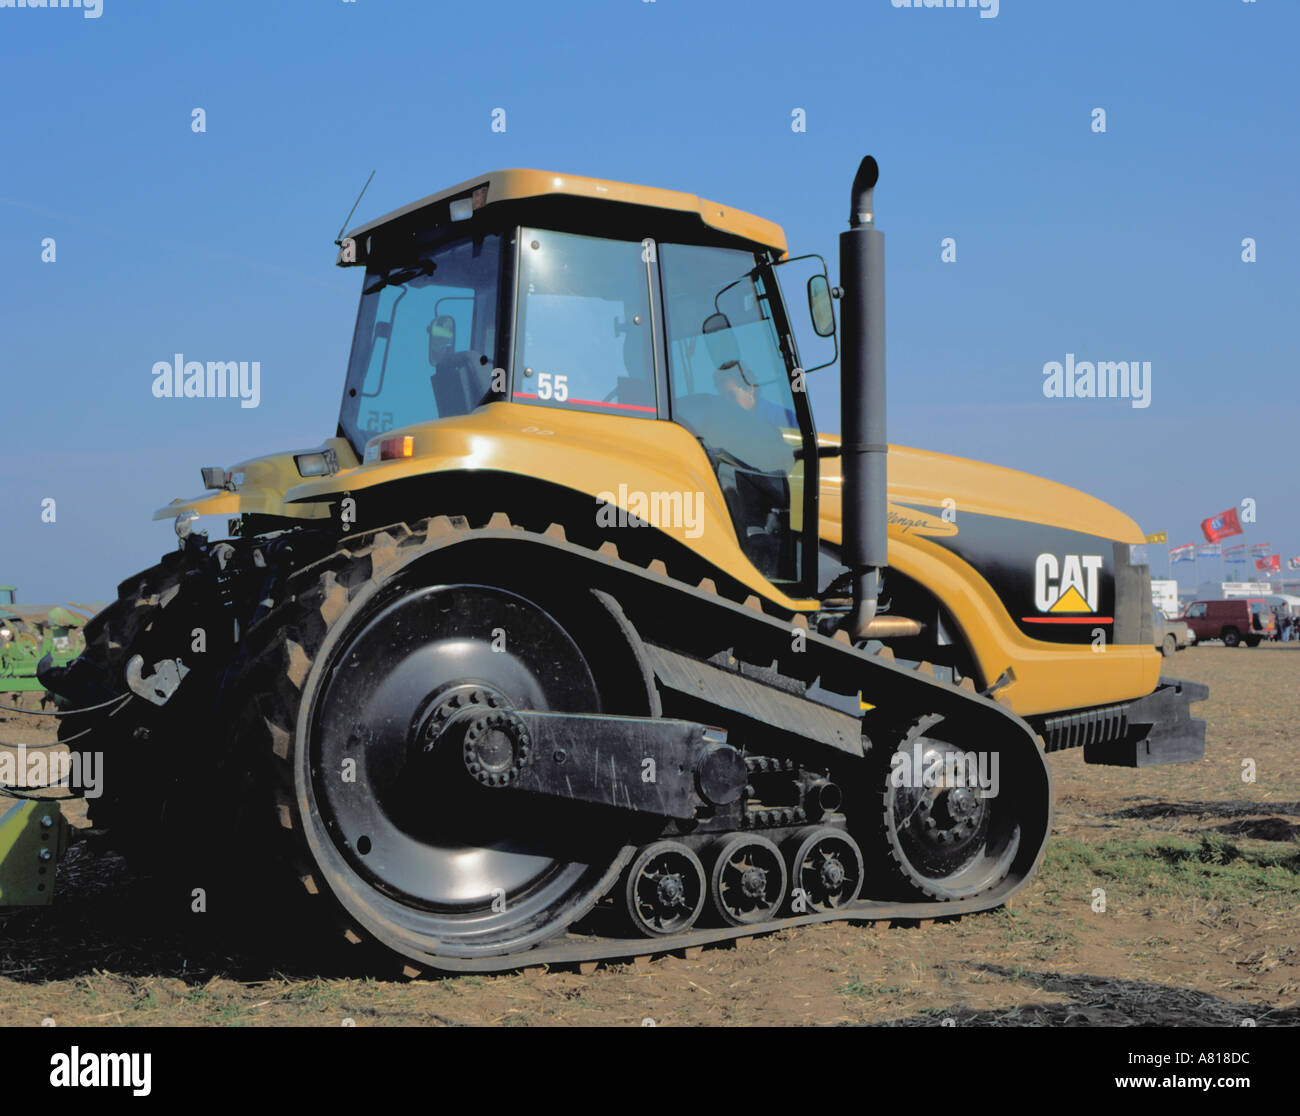 CAT Challenger crawler tractor (a state of the art tractor with one piece moulded rubber tracks). Stock Photo